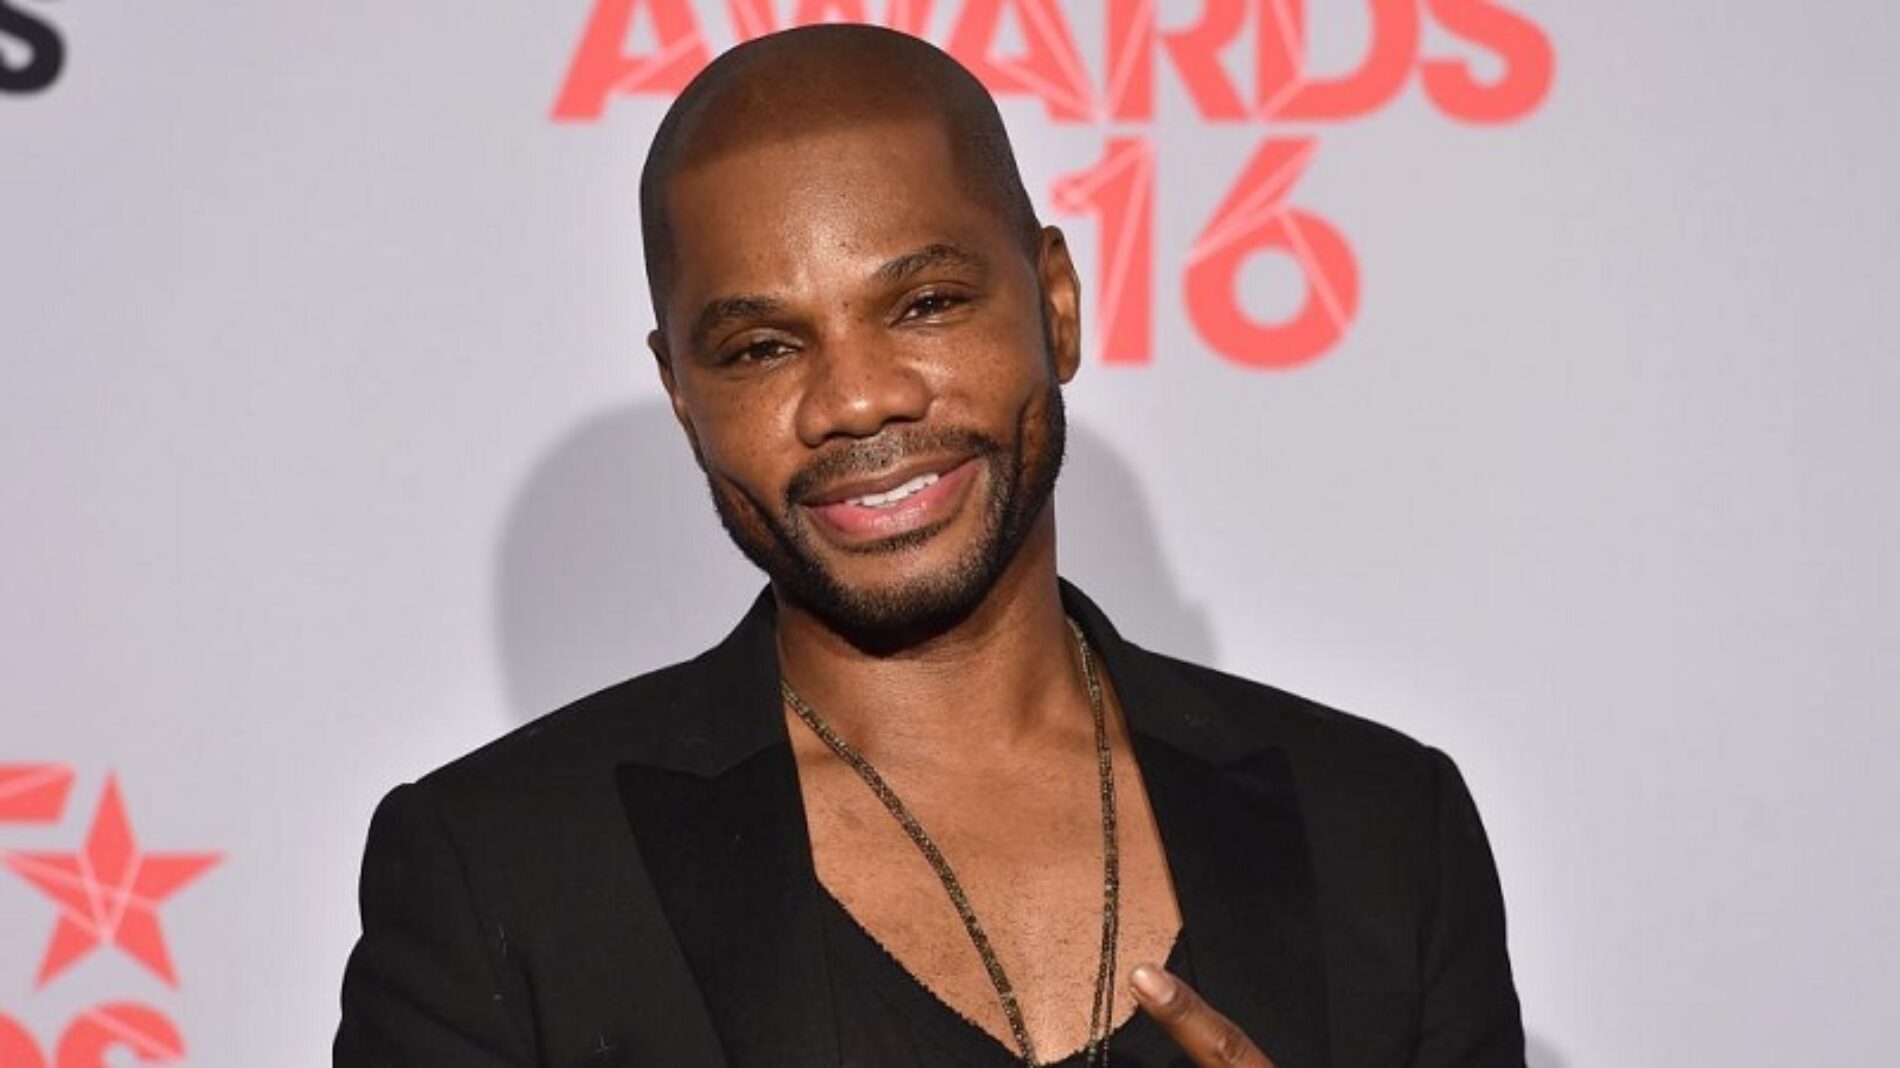 “Homophobia Is Not The Heart Of Christ. It Is Not The Love Of Jesus.” Kirk Franklin Calls Out Antigay Prejudice In The Church